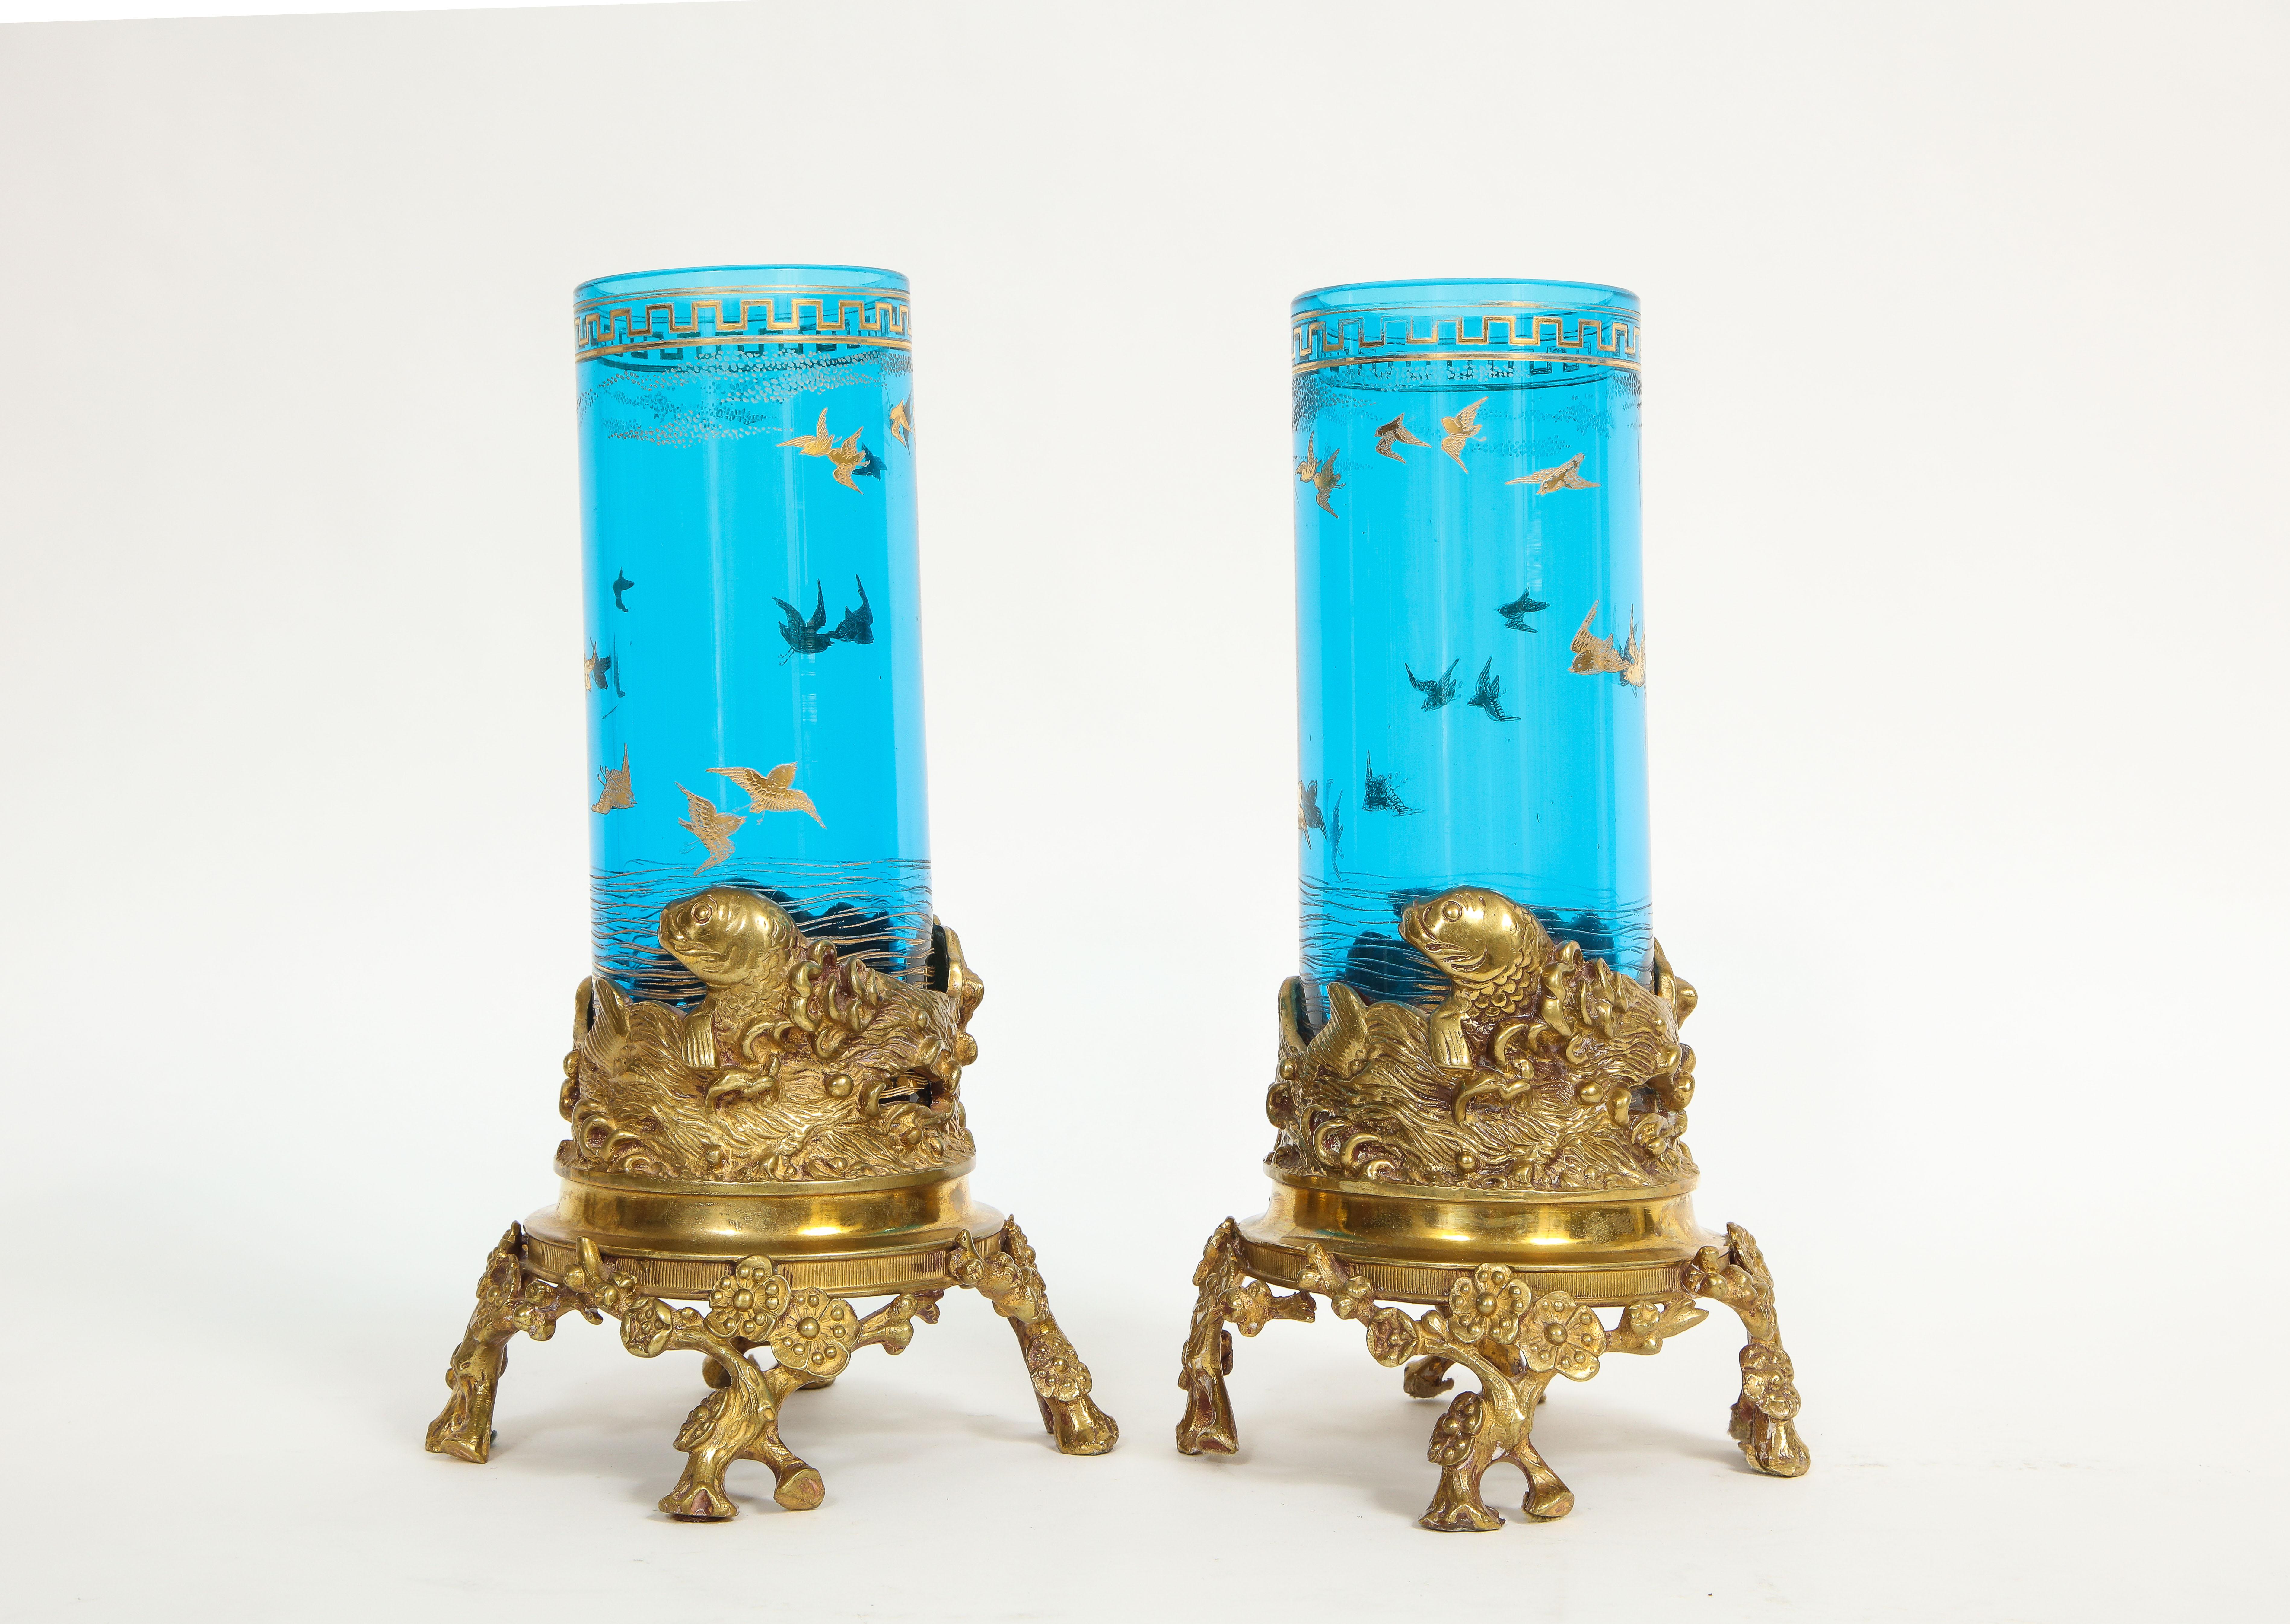 A pair of 19th century French signed Baccarat dore bronze mounted blue etched and gold filled crystal nautical form vases. Each vase has two components, gorgeous bronze mounts and blue crystal vases. The blue crystal vases are of the finest quality